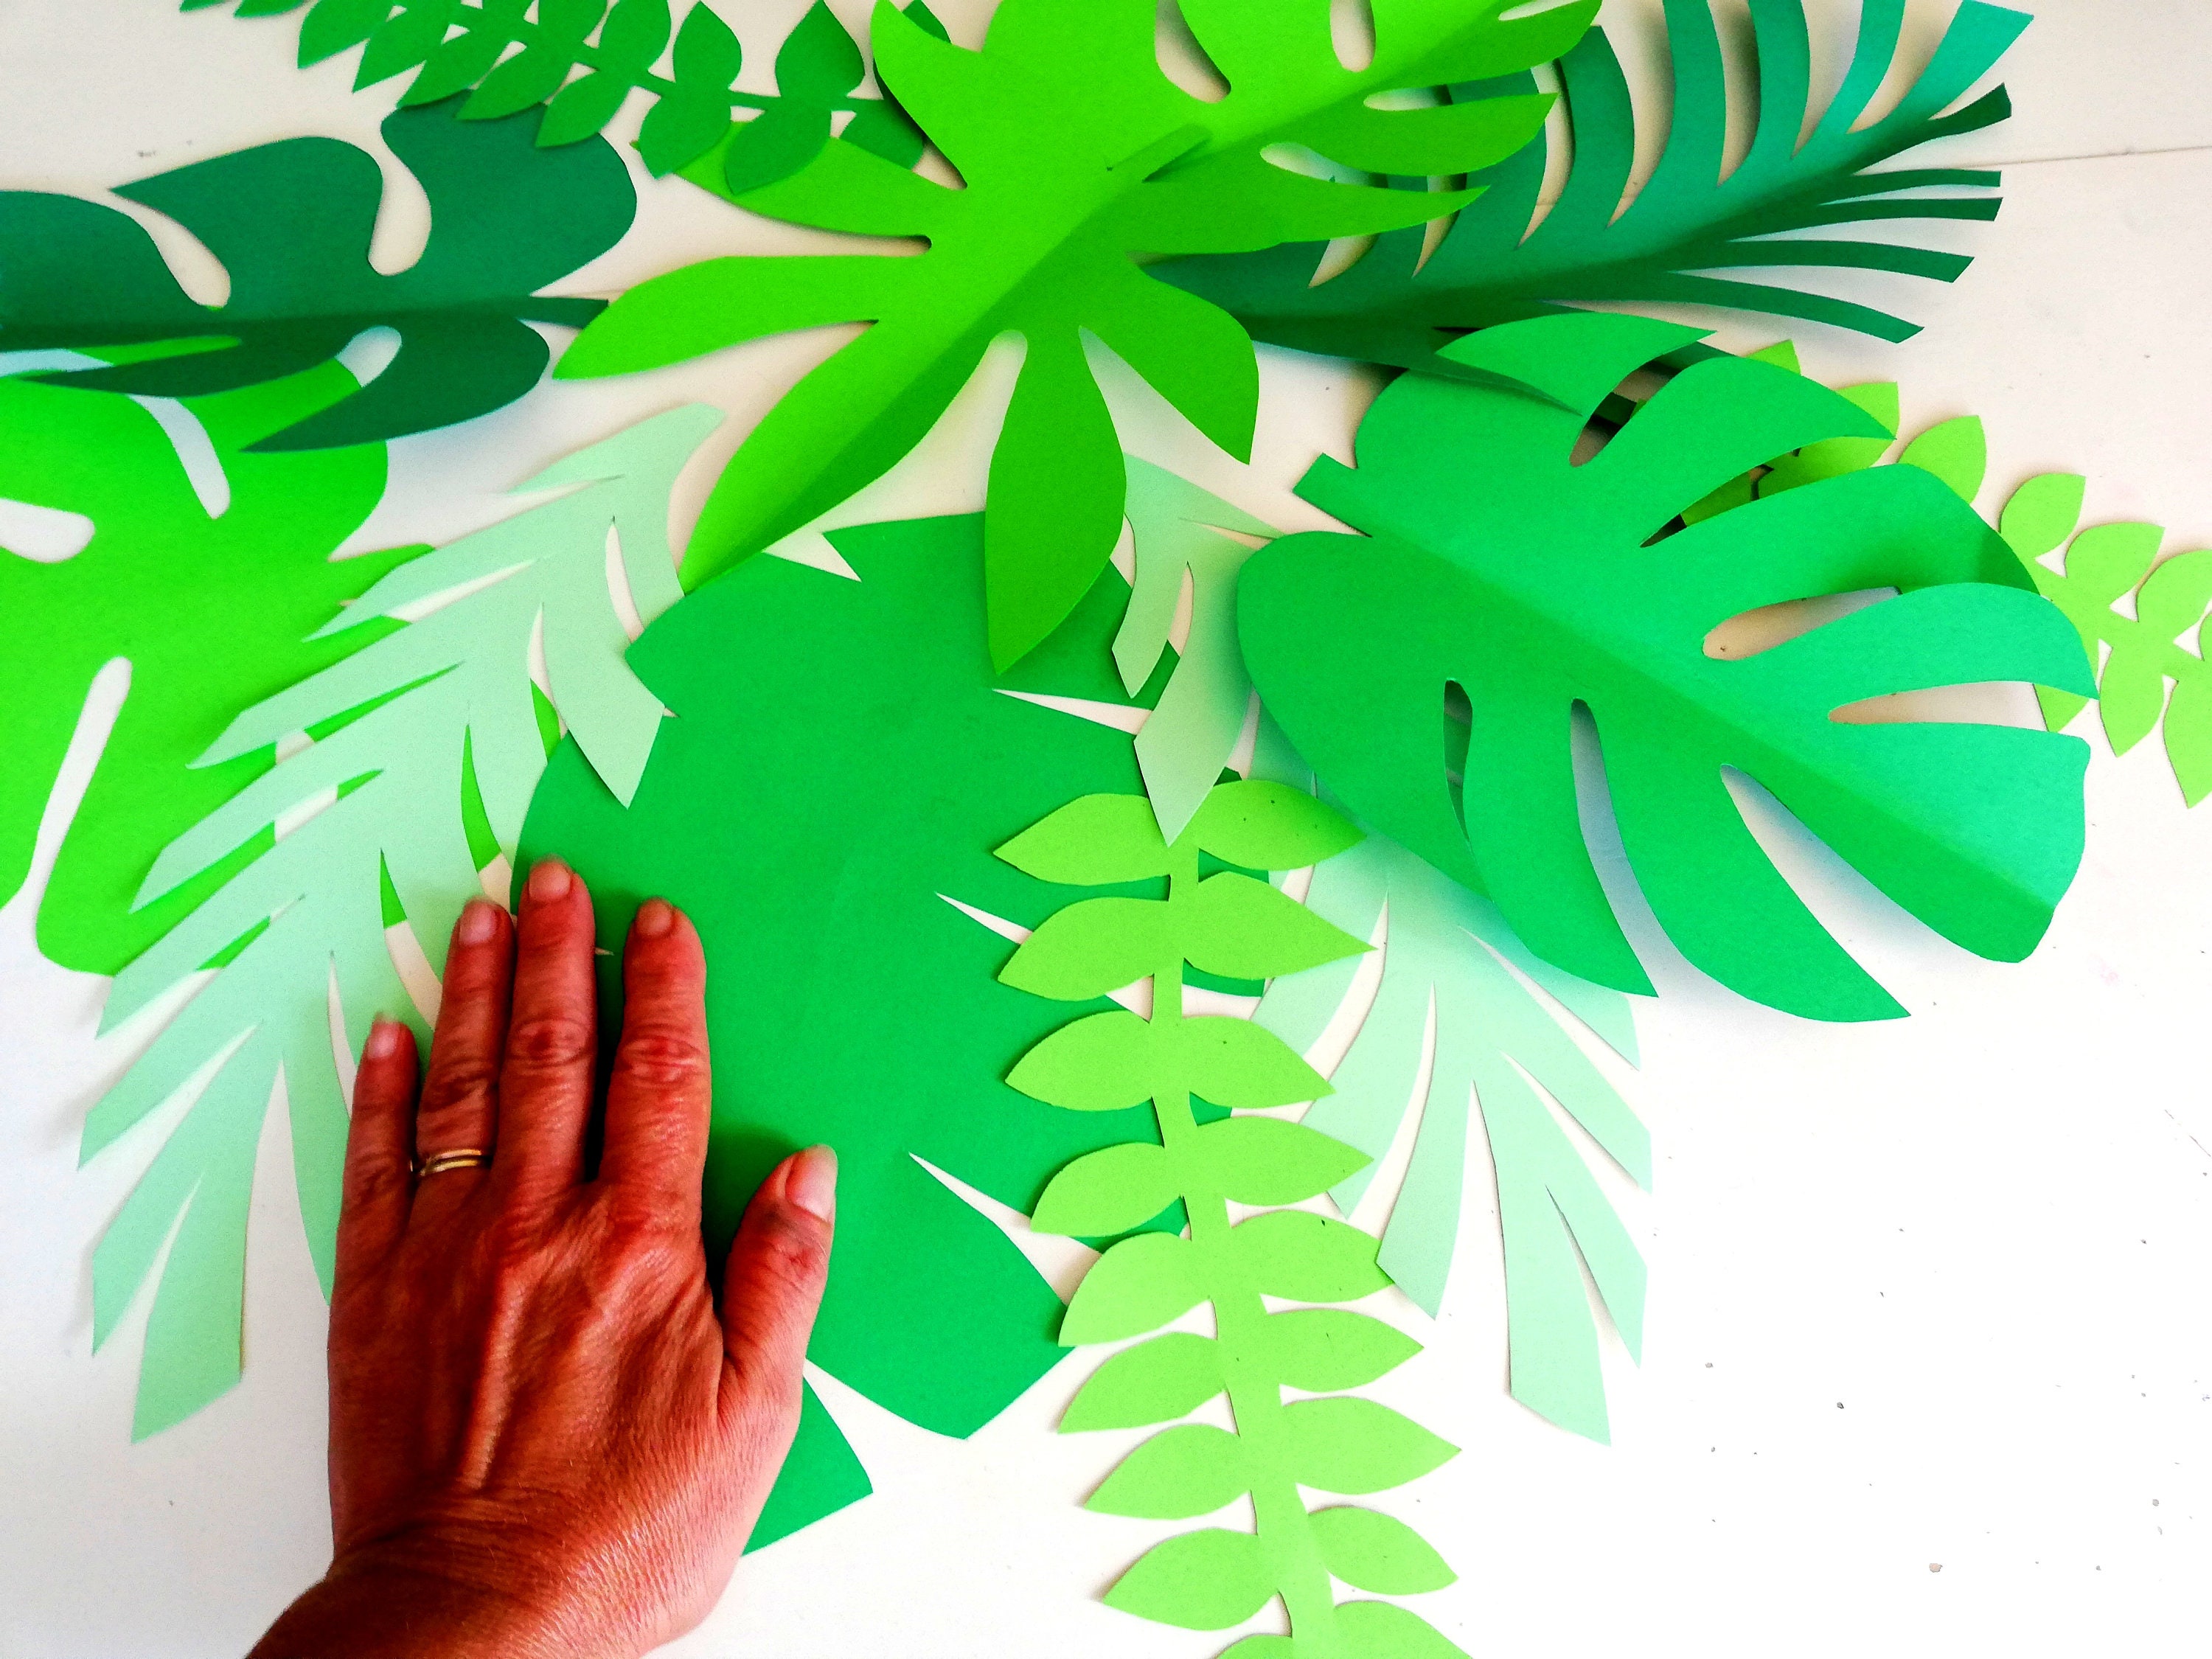 Tropical Paper Leaves, Green Leaves, Large Leaves, Paper Flower